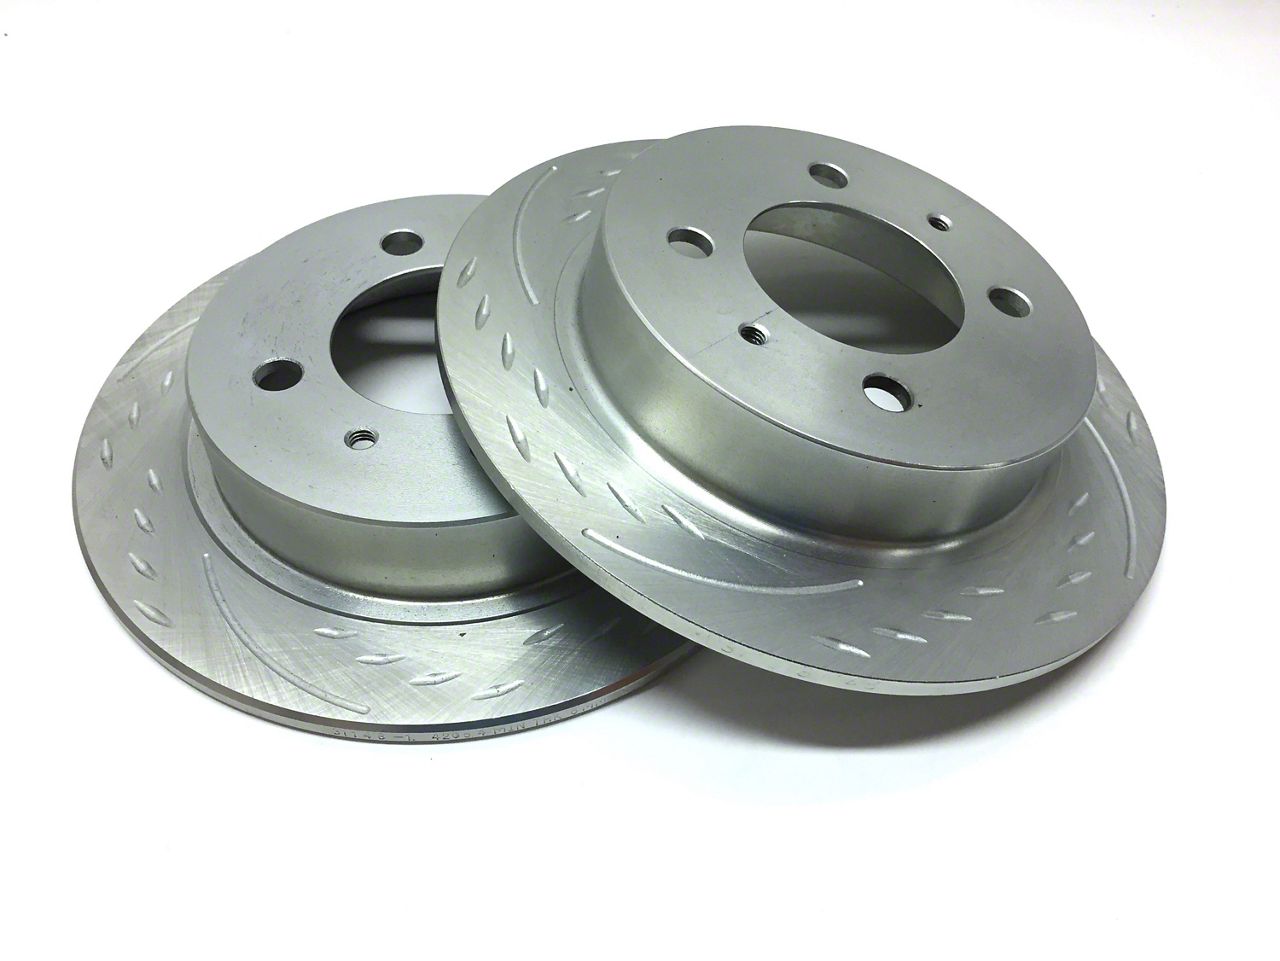 Details about  / SP Performance Front Rotors for 2009 SIERRA 2500 HDDiamond Slot D55-072-P8372